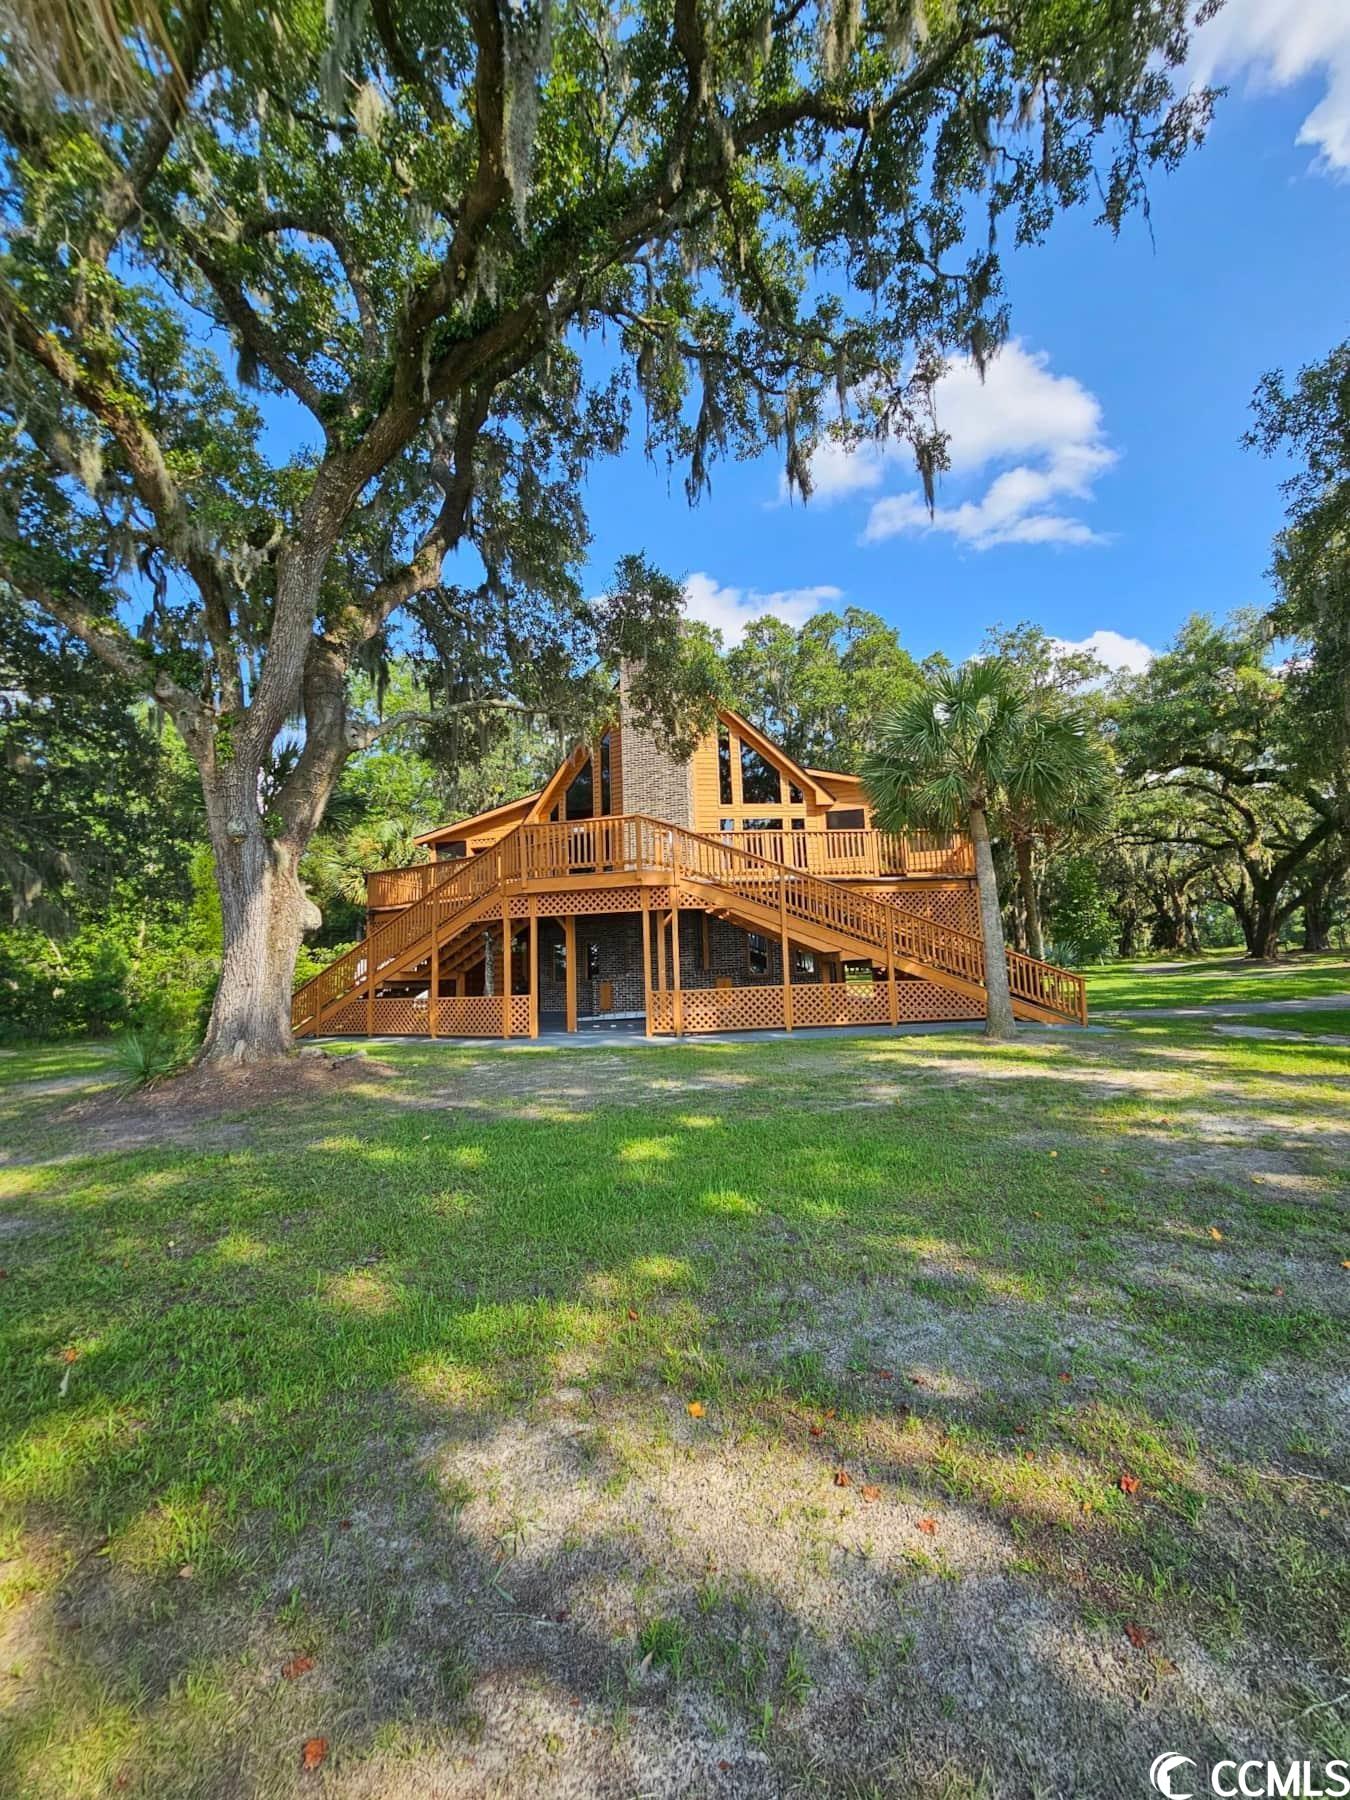 have you ever dreamed of owning a prime piece of deep water front property in beautiful south carolina? as you drive into the property you will be surrendered by breathtaking live oak trees and the swaying of moss welcoming you in. imagine walking outside your front door and taking just a few short steps to your own private dock, overlooking the river as far as you can see, and hearing the peaceful sounds of nature surrounding you. here is your rare opportunity to own a gorgeous river front home on the sampit river in a rural part of georgetown, sc on mauricena plantation. this property is a remarkable investment opportunity such as: vacation rental, wedding venue, dock rentals, etc, the possibilities are endless! or enjoy the property for yourself and your family and all it has to offer. the owner of this home is a sc realtor with home grown real estate. home is being sold as-is.